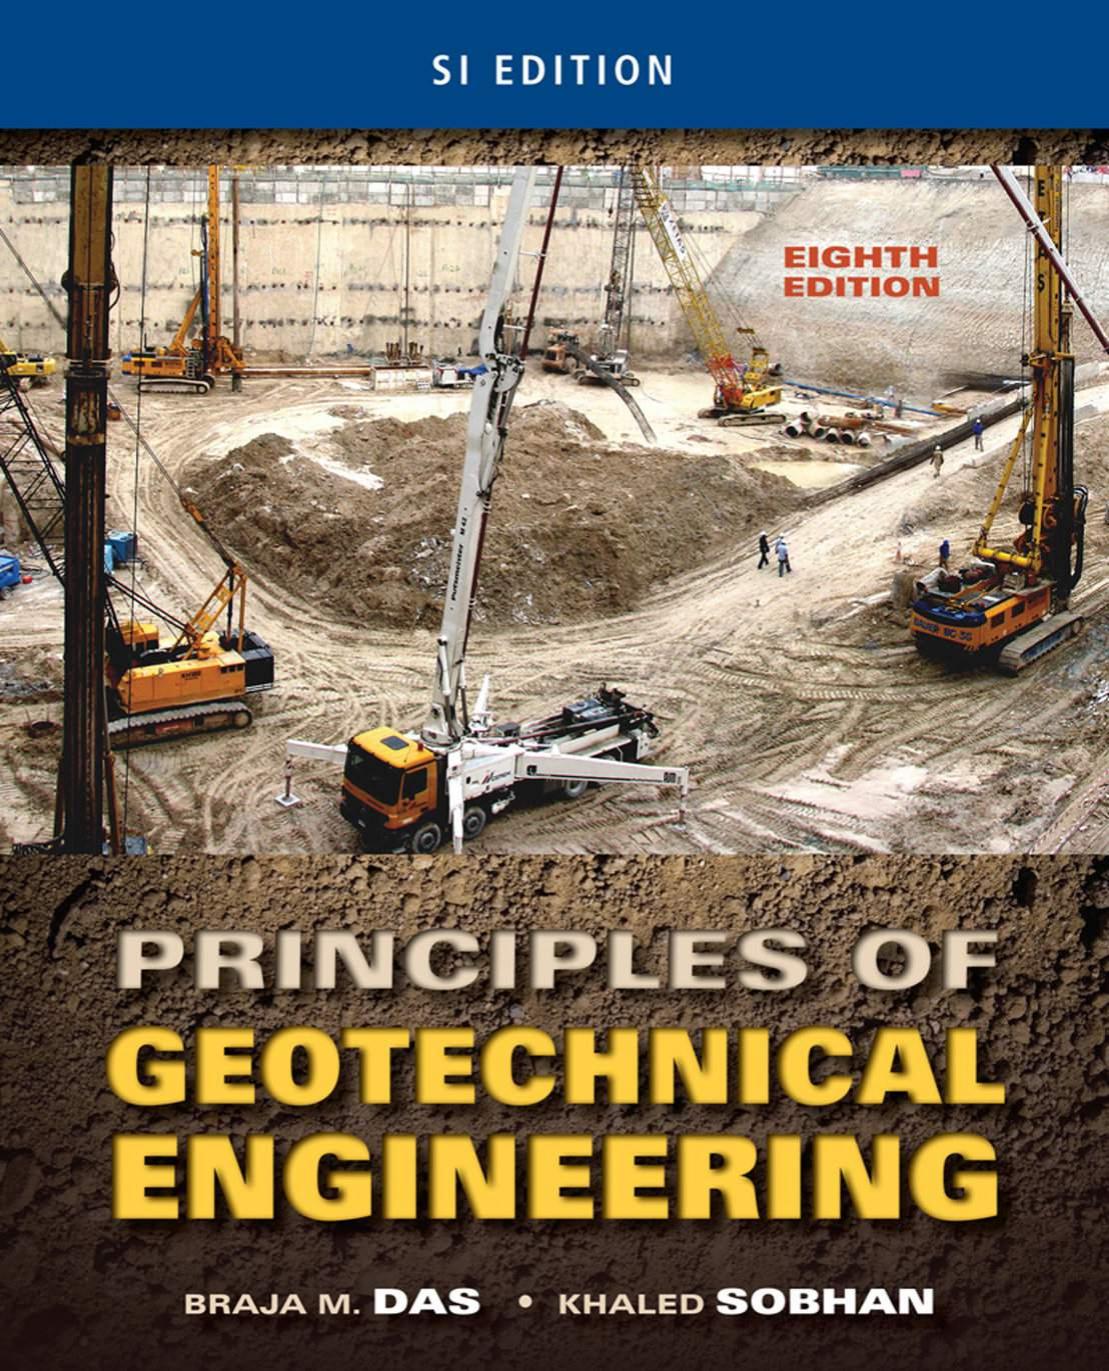 Principles of Geotechnical Engineering EighthEdition 2014